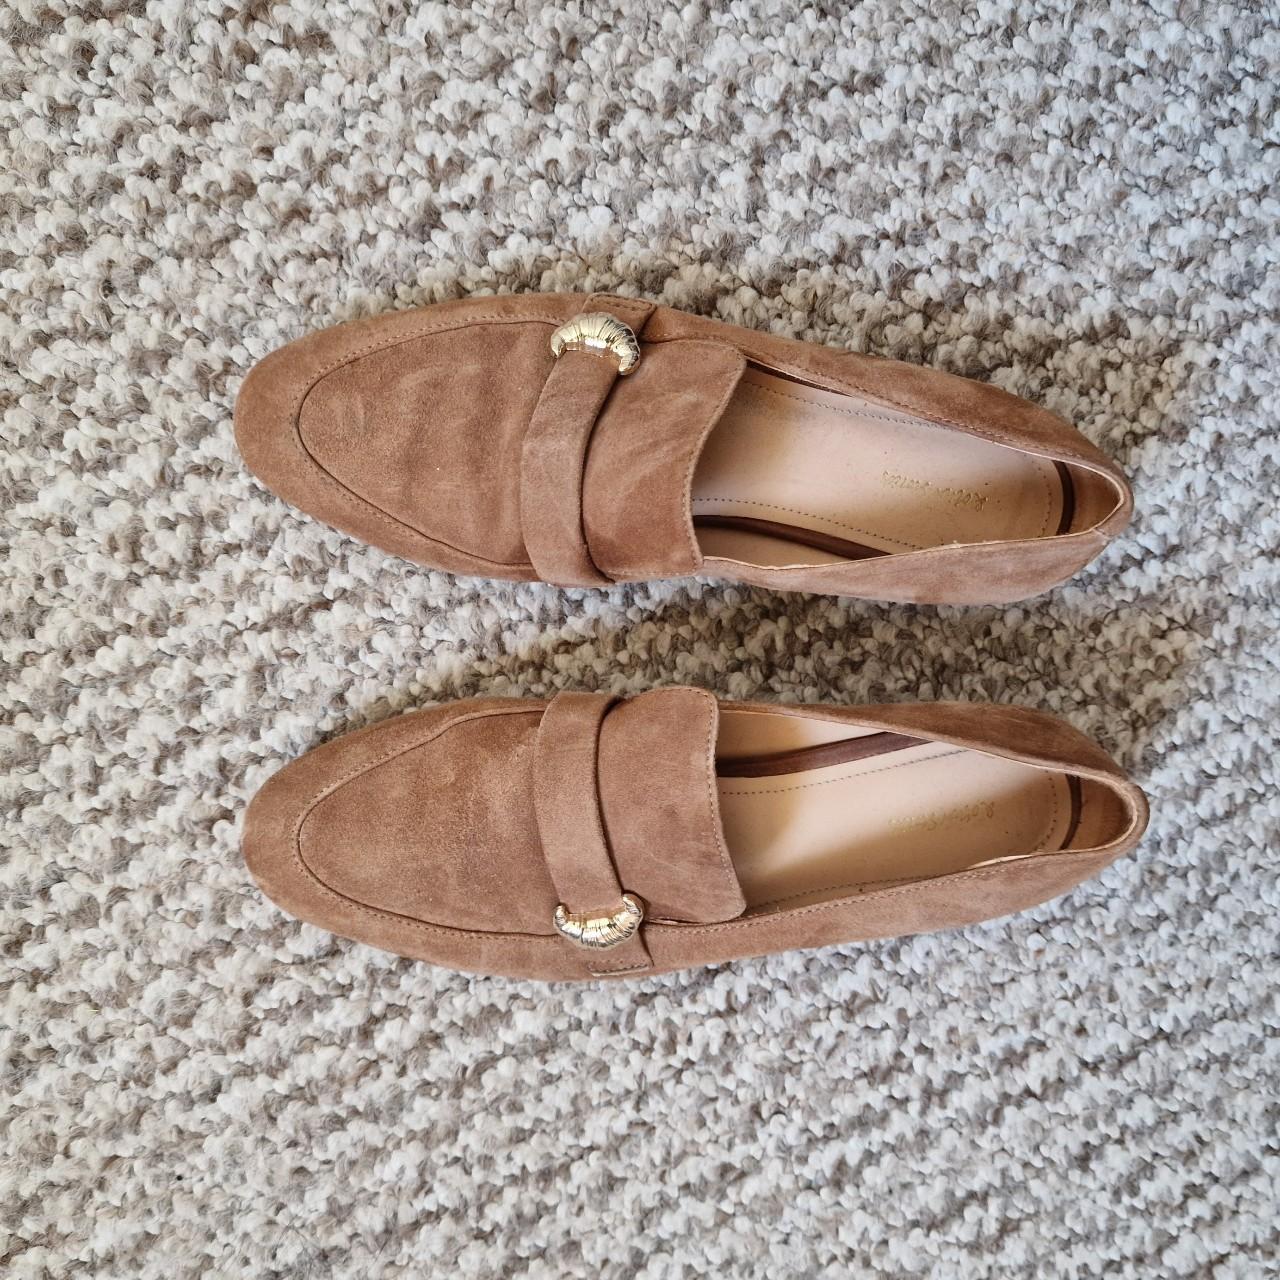 & Other Stories Women's Loafers | Depop